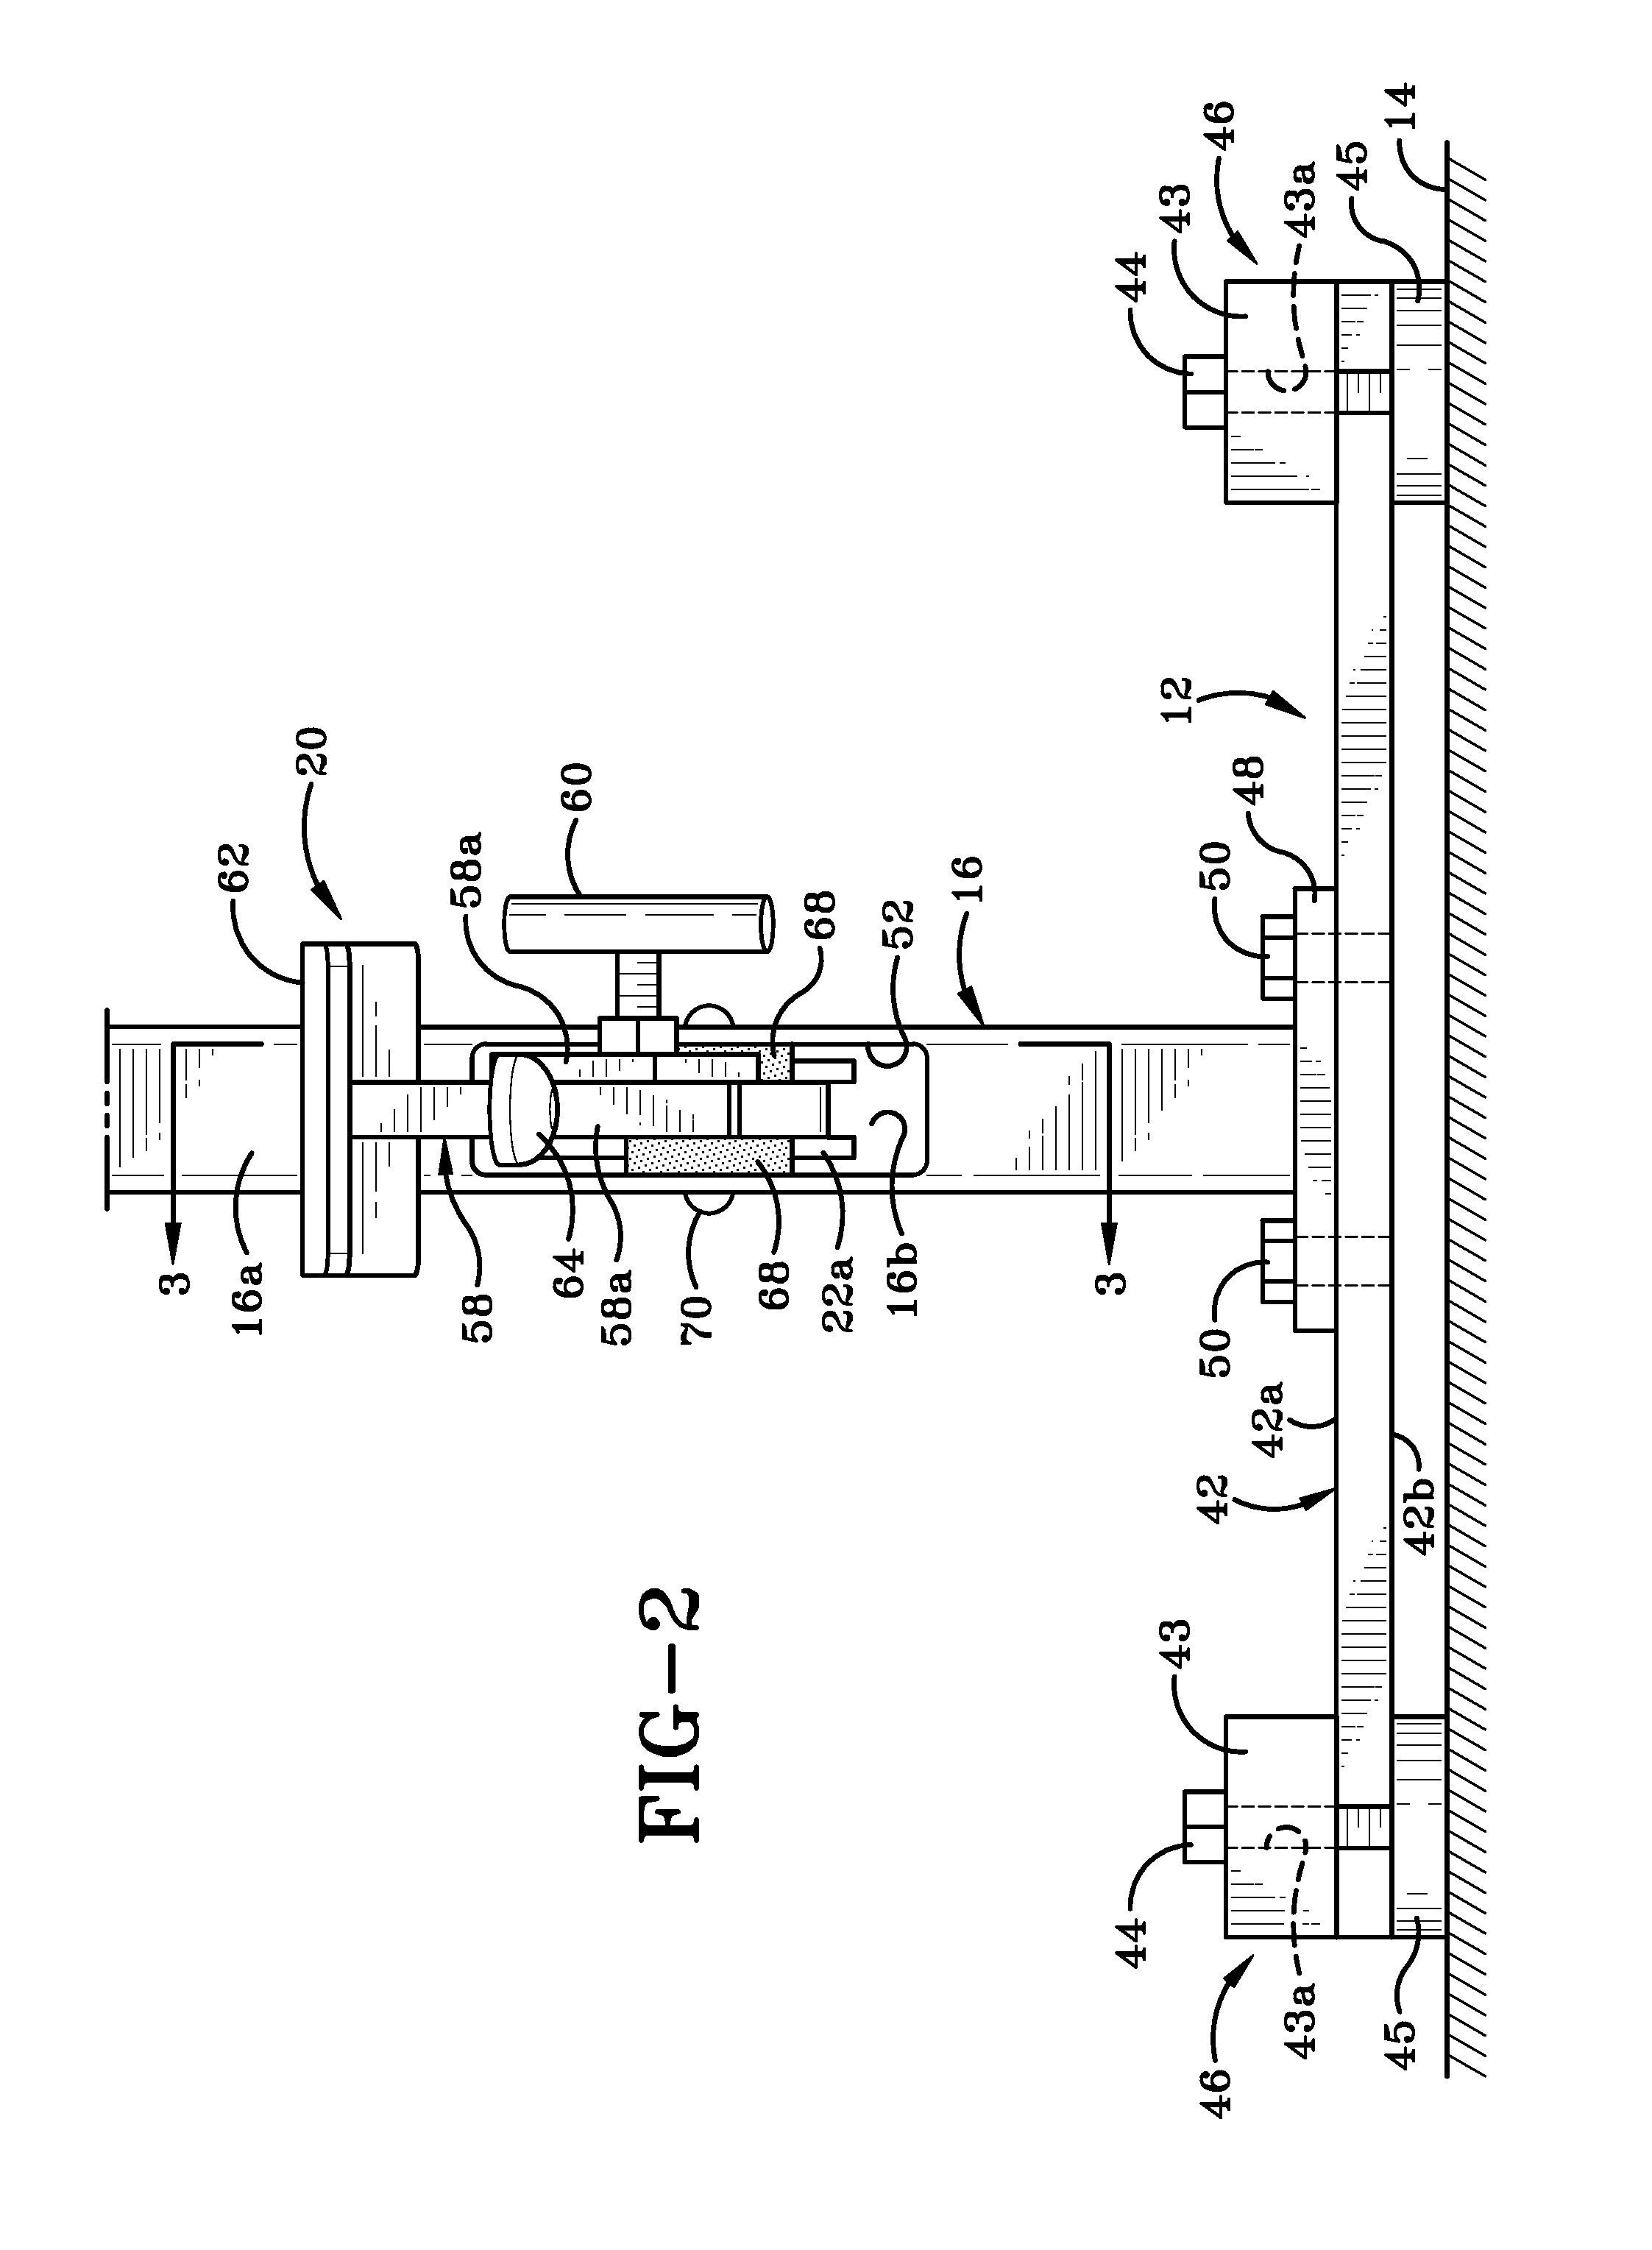 Feed assembly for a riveting machine and a method of operation of the same